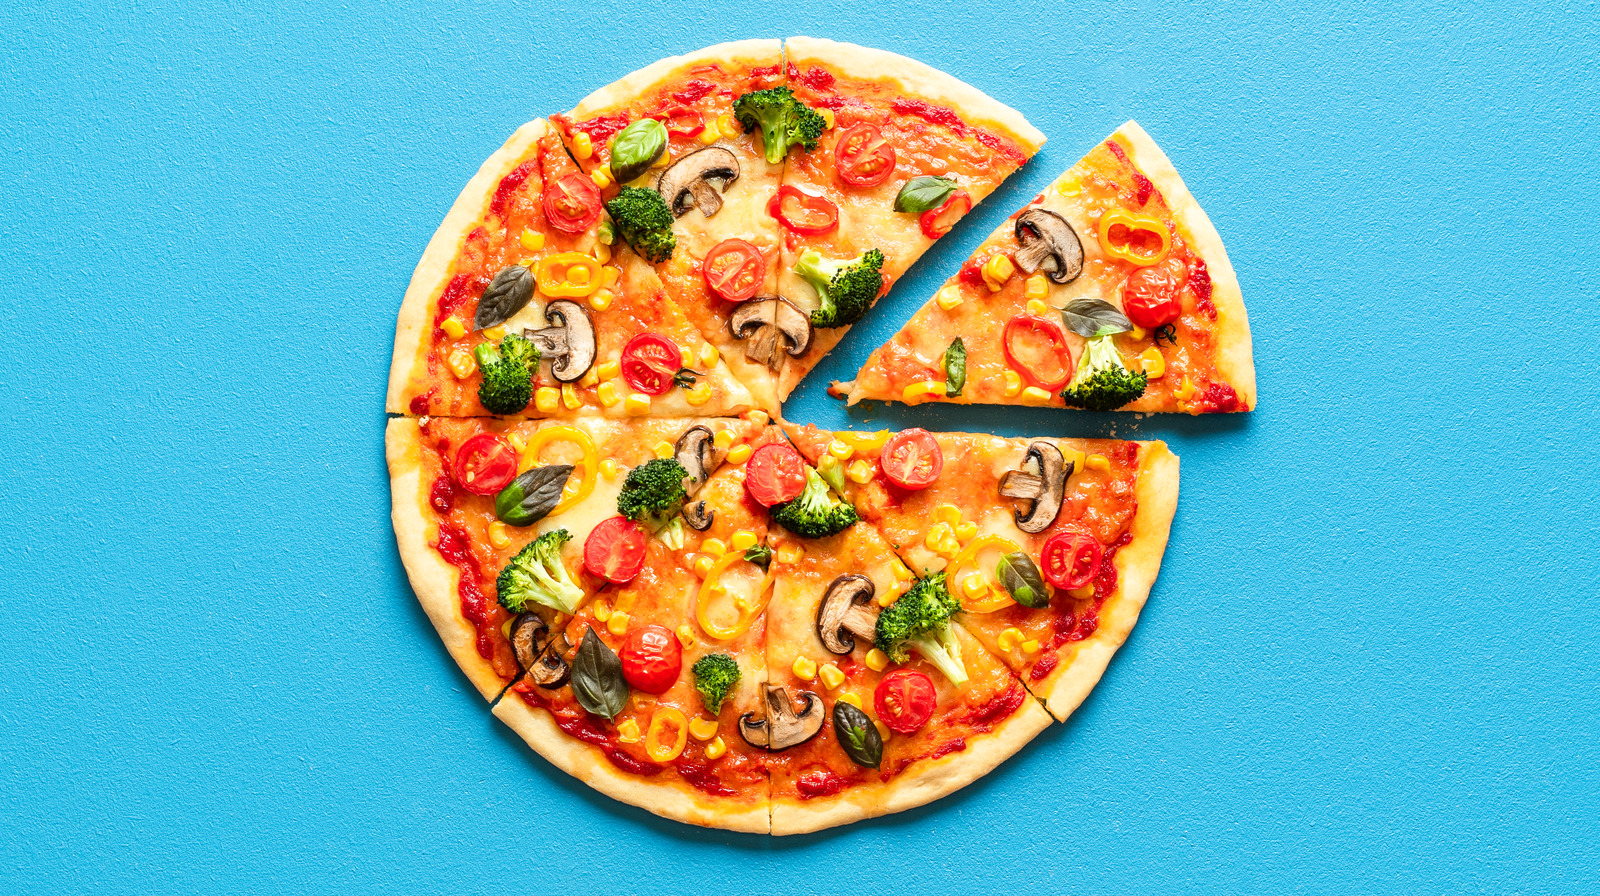 https://www.thedailymeal.com/img/gallery/how-to-cut-veggie-loaded-pizza-to-keep-the-toppings-in-check/l-intro-1681140636.jpg